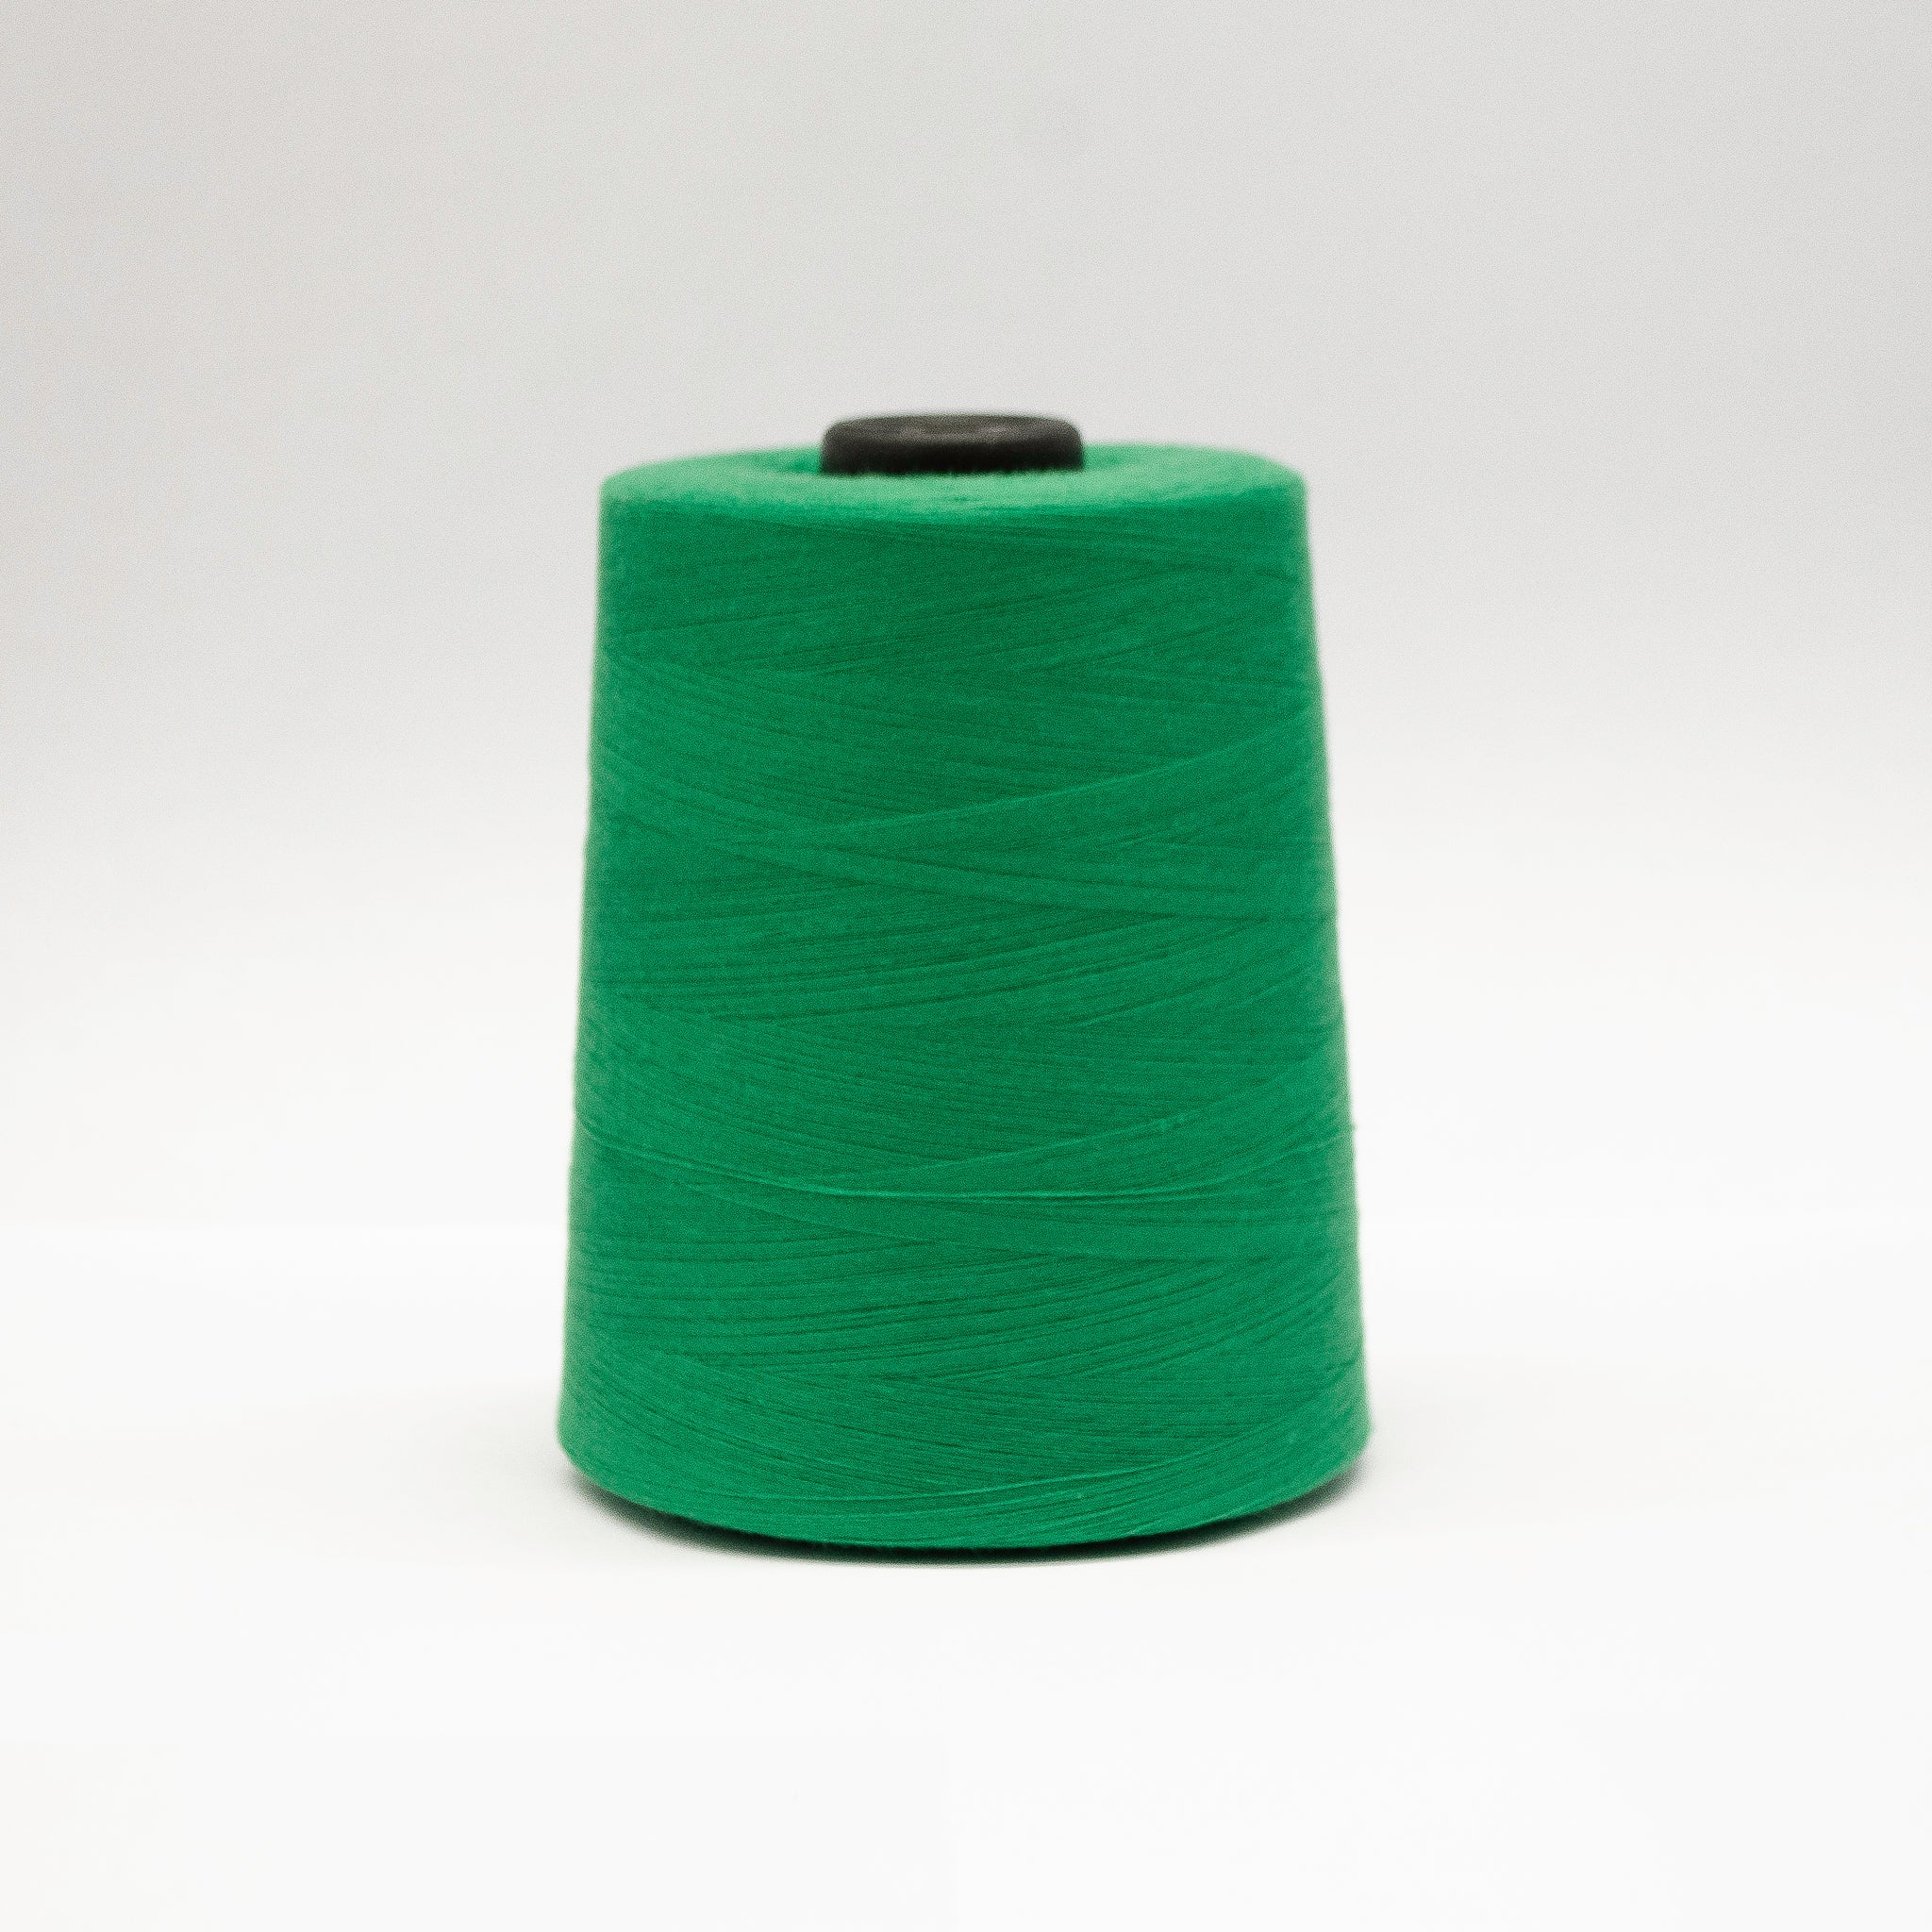 Sewing Threads - Sewing Thread Spools for Awnings, Tarps and Outdoor –